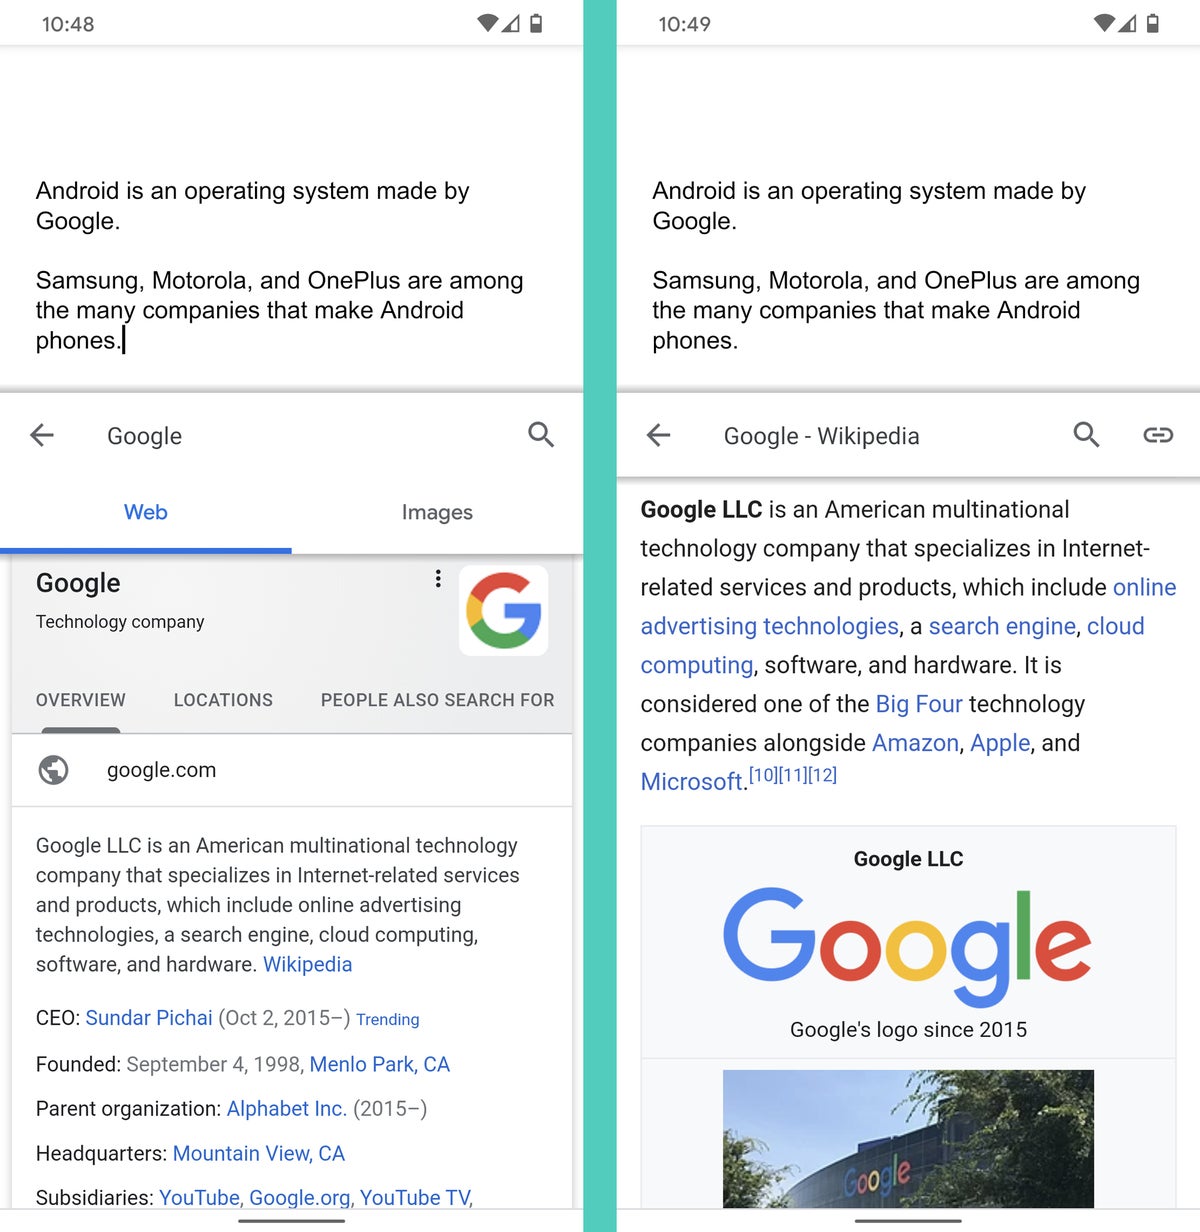 indhente mærke spyd 9 handy hidden features in Google Docs on Android | Computerworld